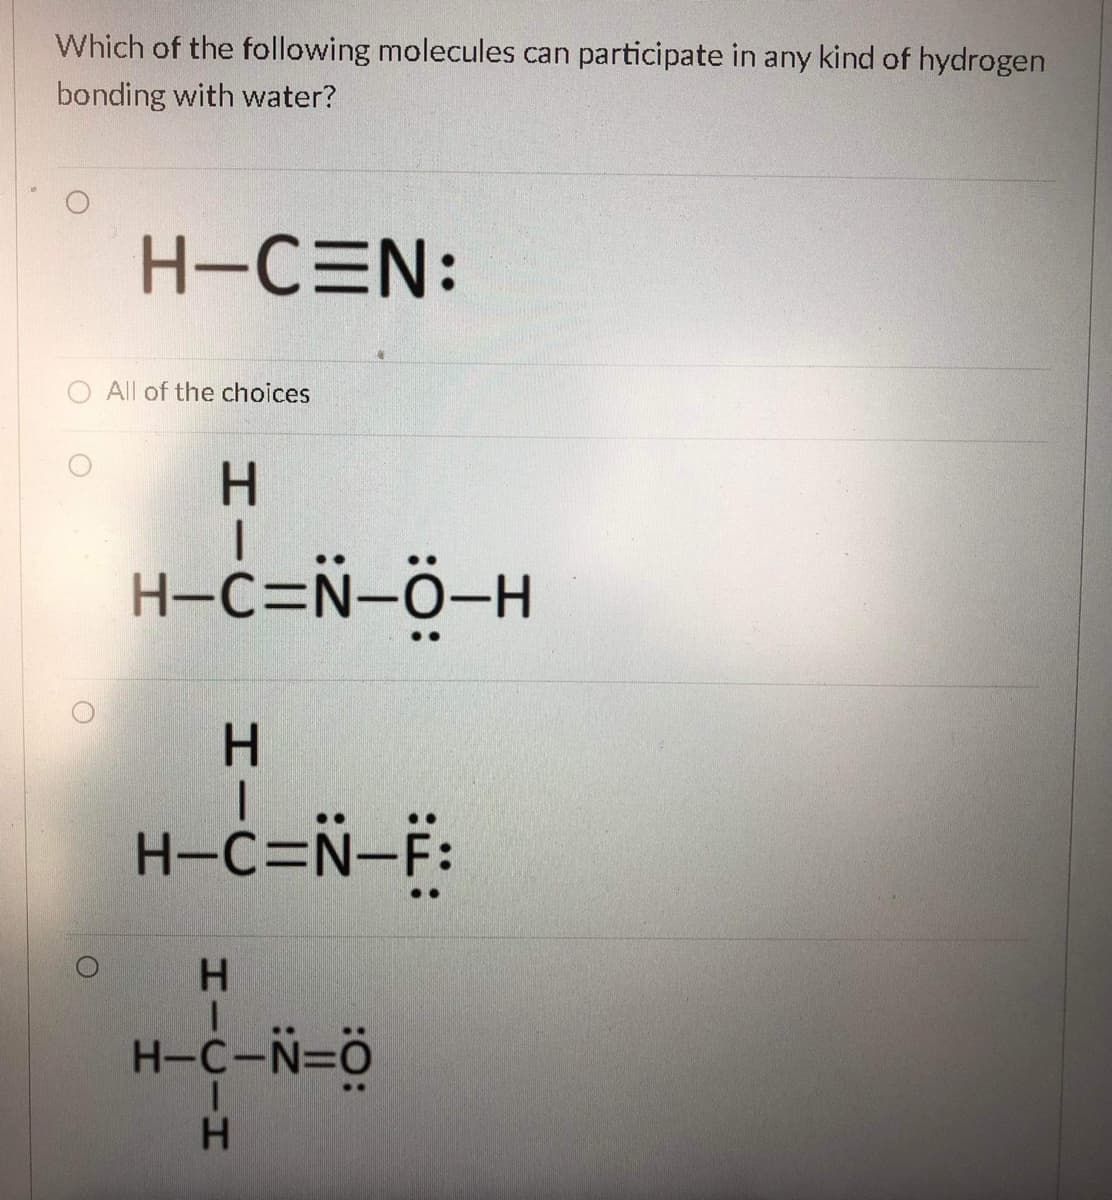 Which of the following molecules can participate in any kind of hydrogen
bonding with water?
H-CEN:
All of the choices
H.
H-c=N-Ö-H
H.
H-C=N-F:
H-C-N=ö
HICIH
